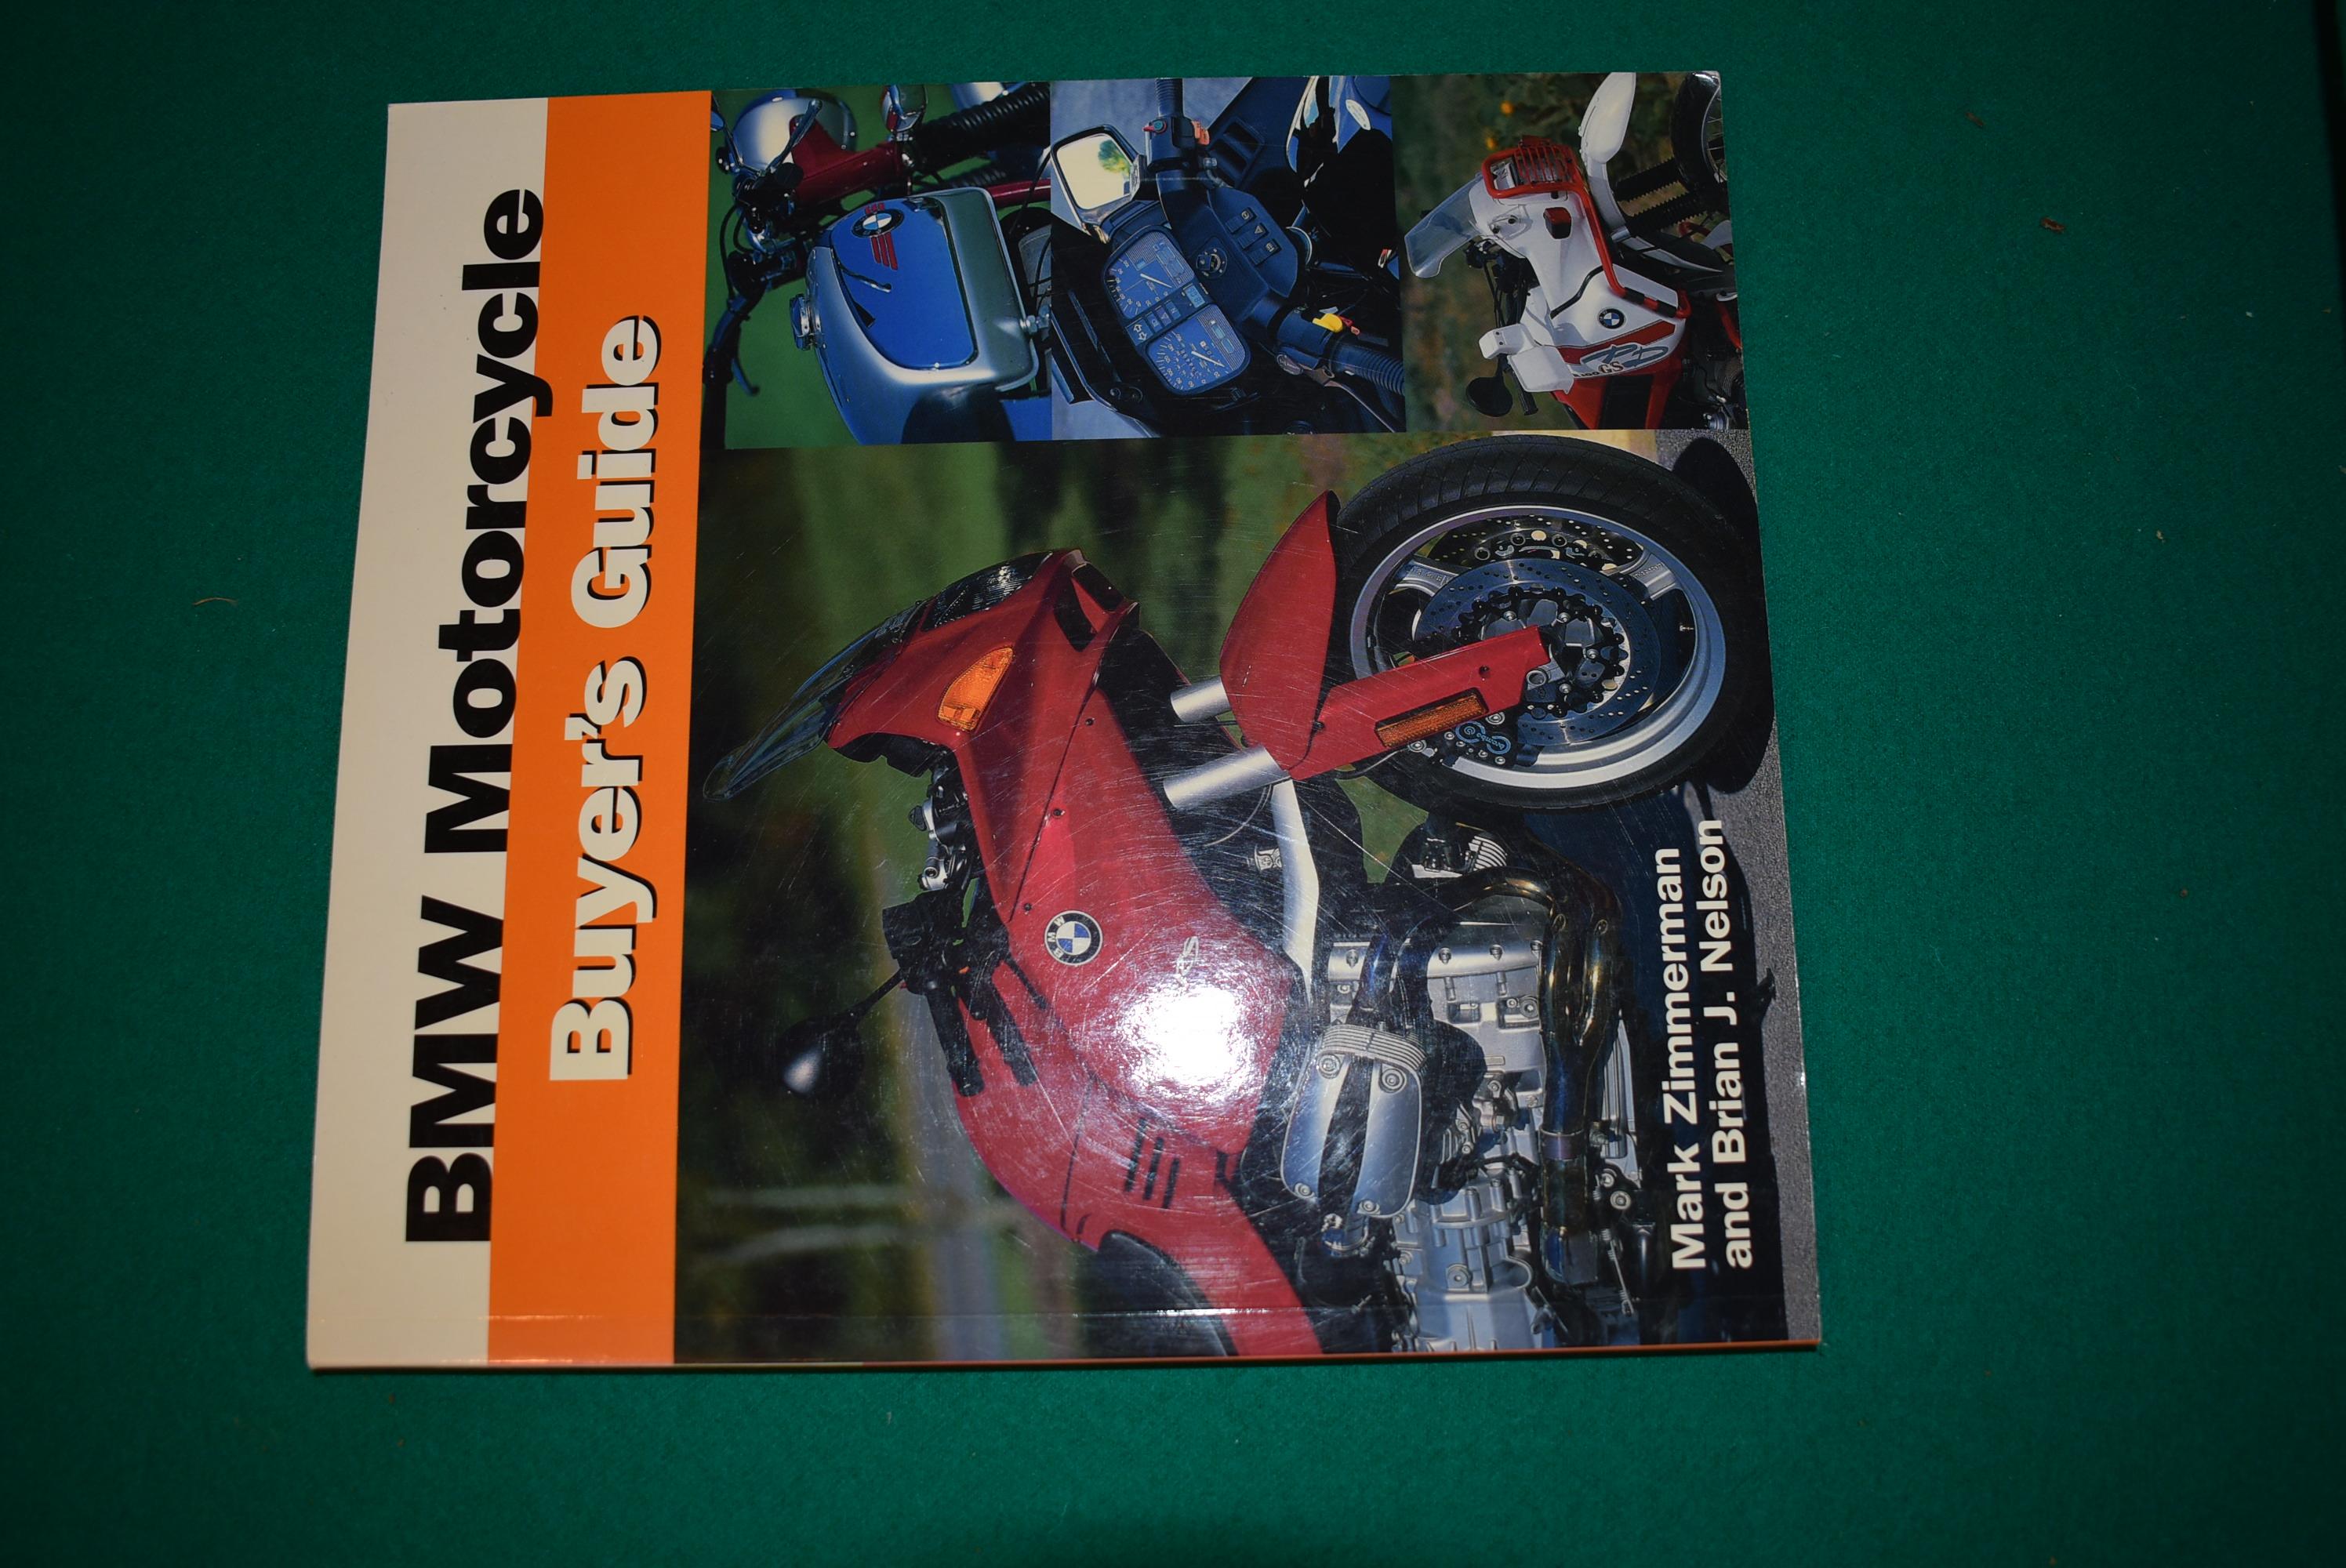 BMW Motorcycle Buyer's Guide by Mark Zimmerman: As New Softcover (2003